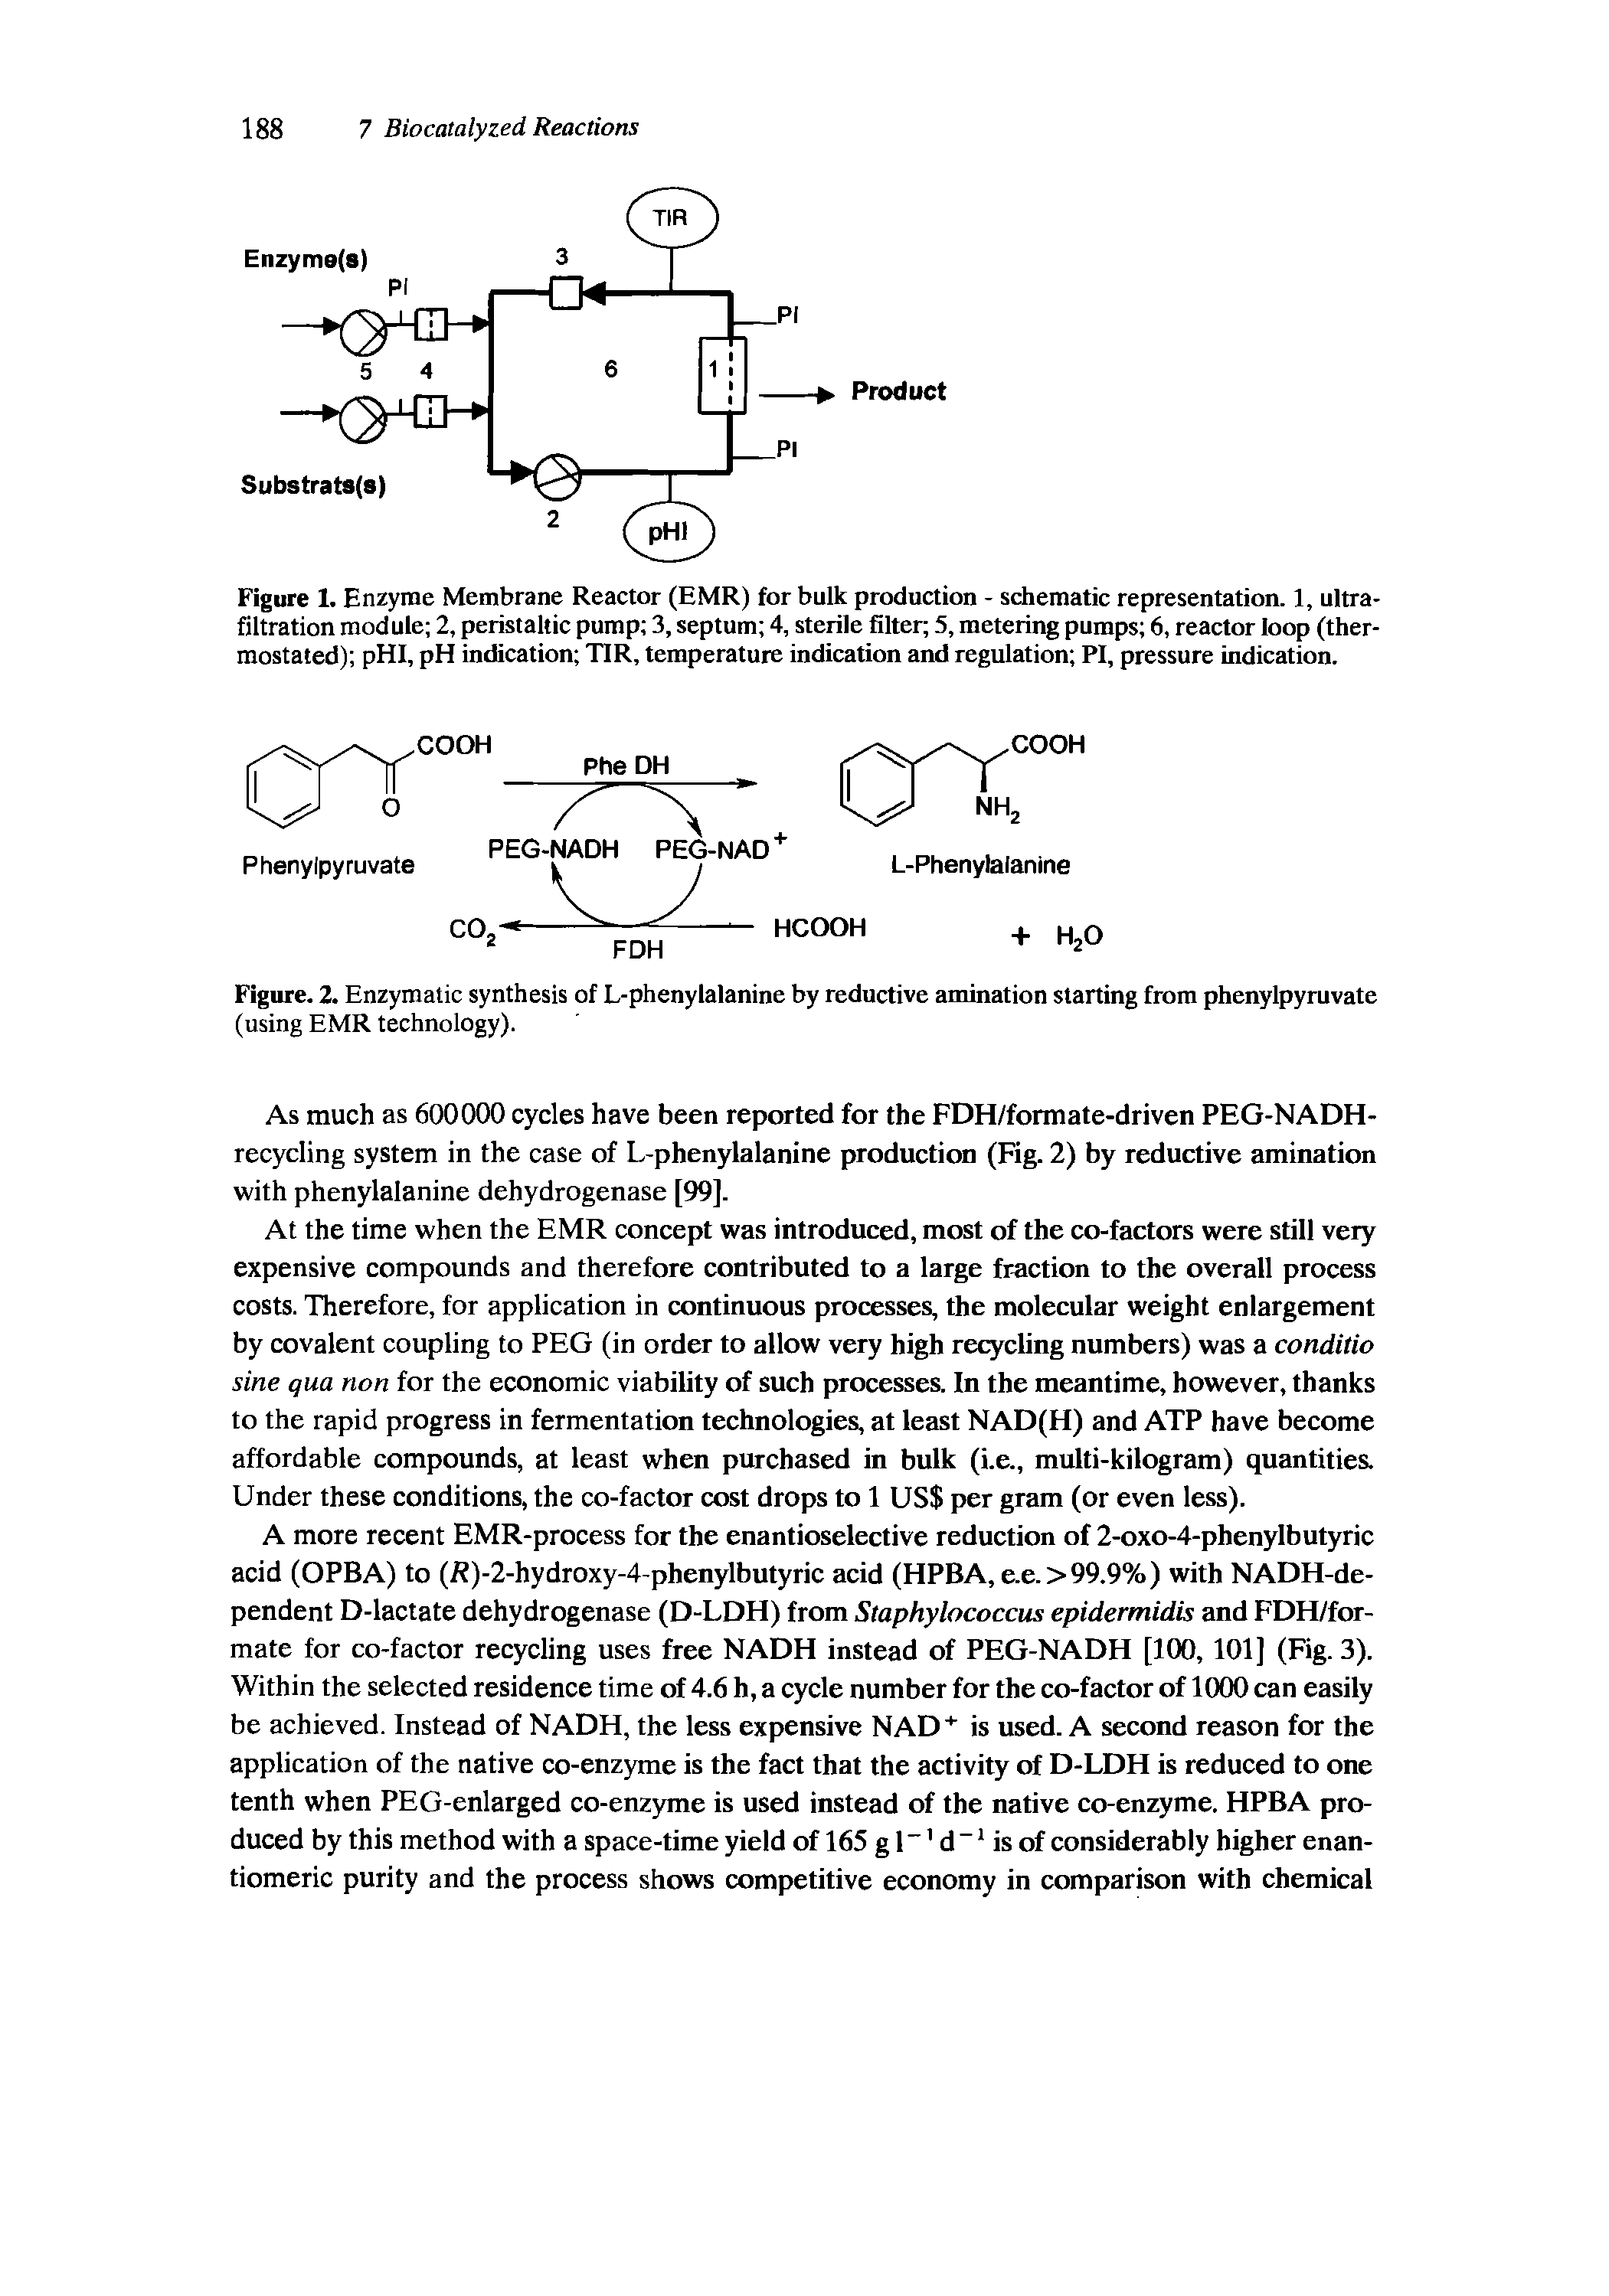 Figure. 2. Enzymatic synthesis of L-phenylalanine by reductive amination starting from phenylpyruvate (using EMR technology).